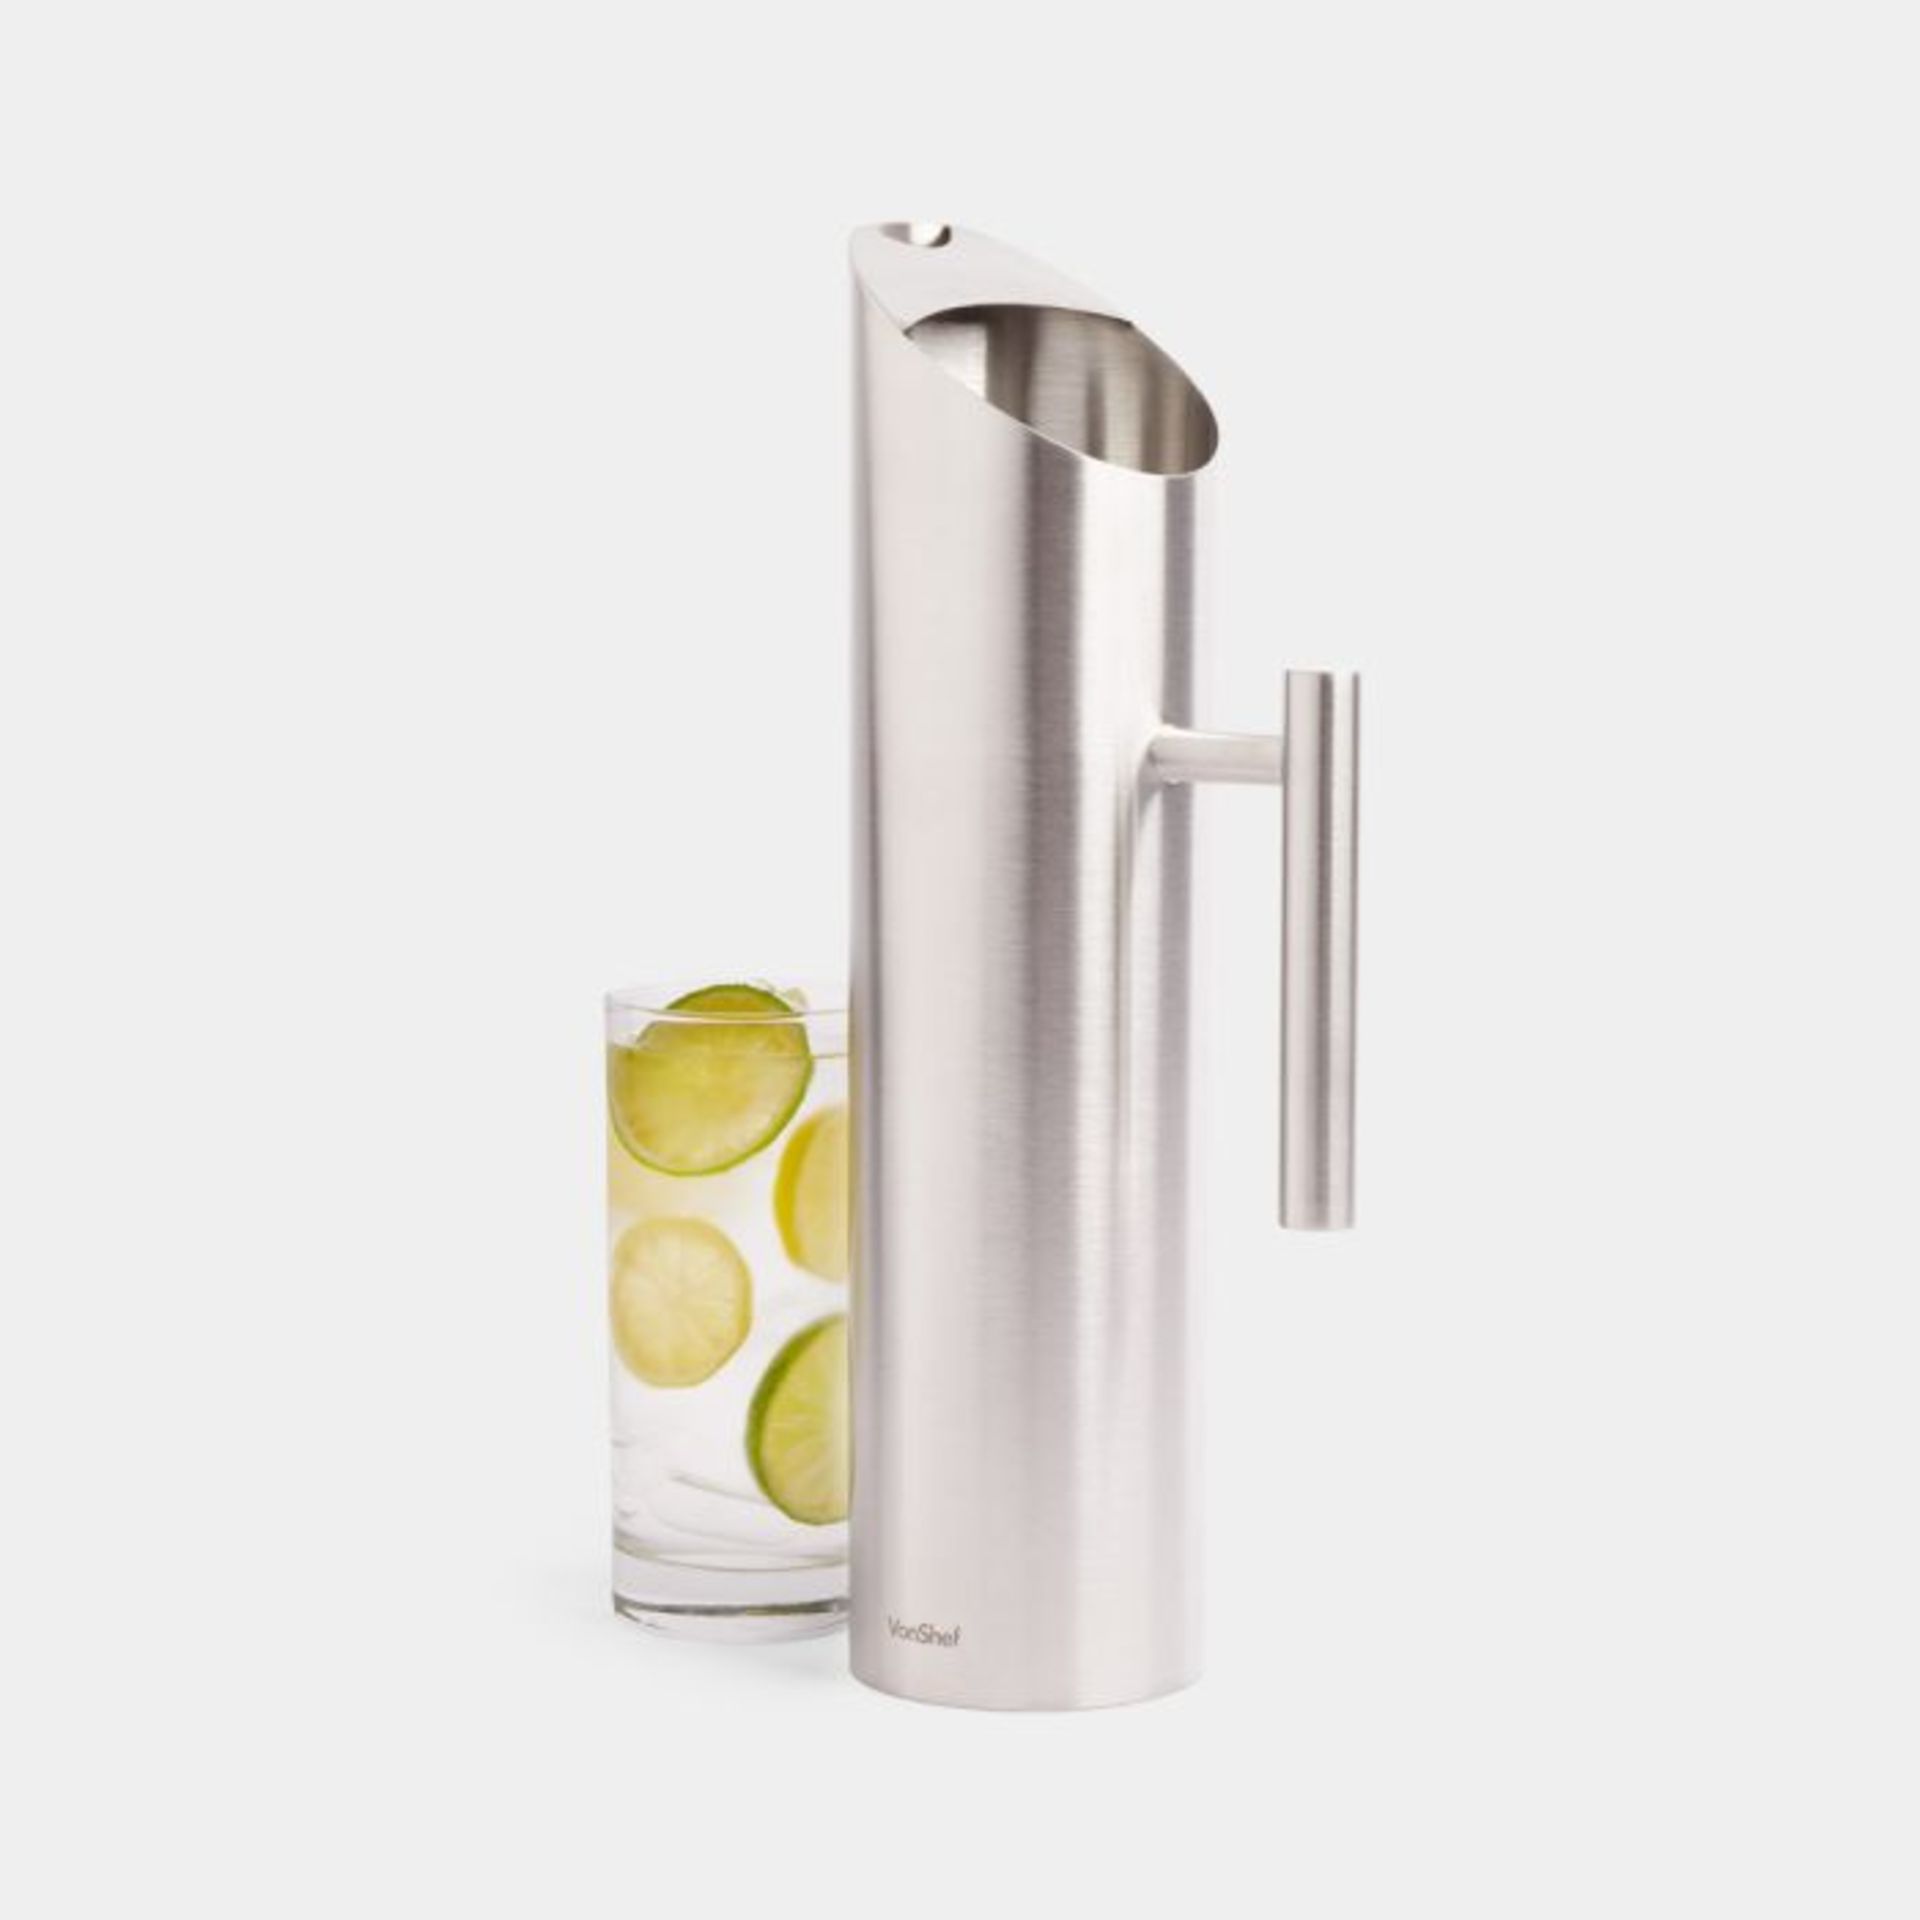 1.7L Brushed Steel Water Pitcher. - PW. Elegant and practical, this sleek water pitcher from VonShef